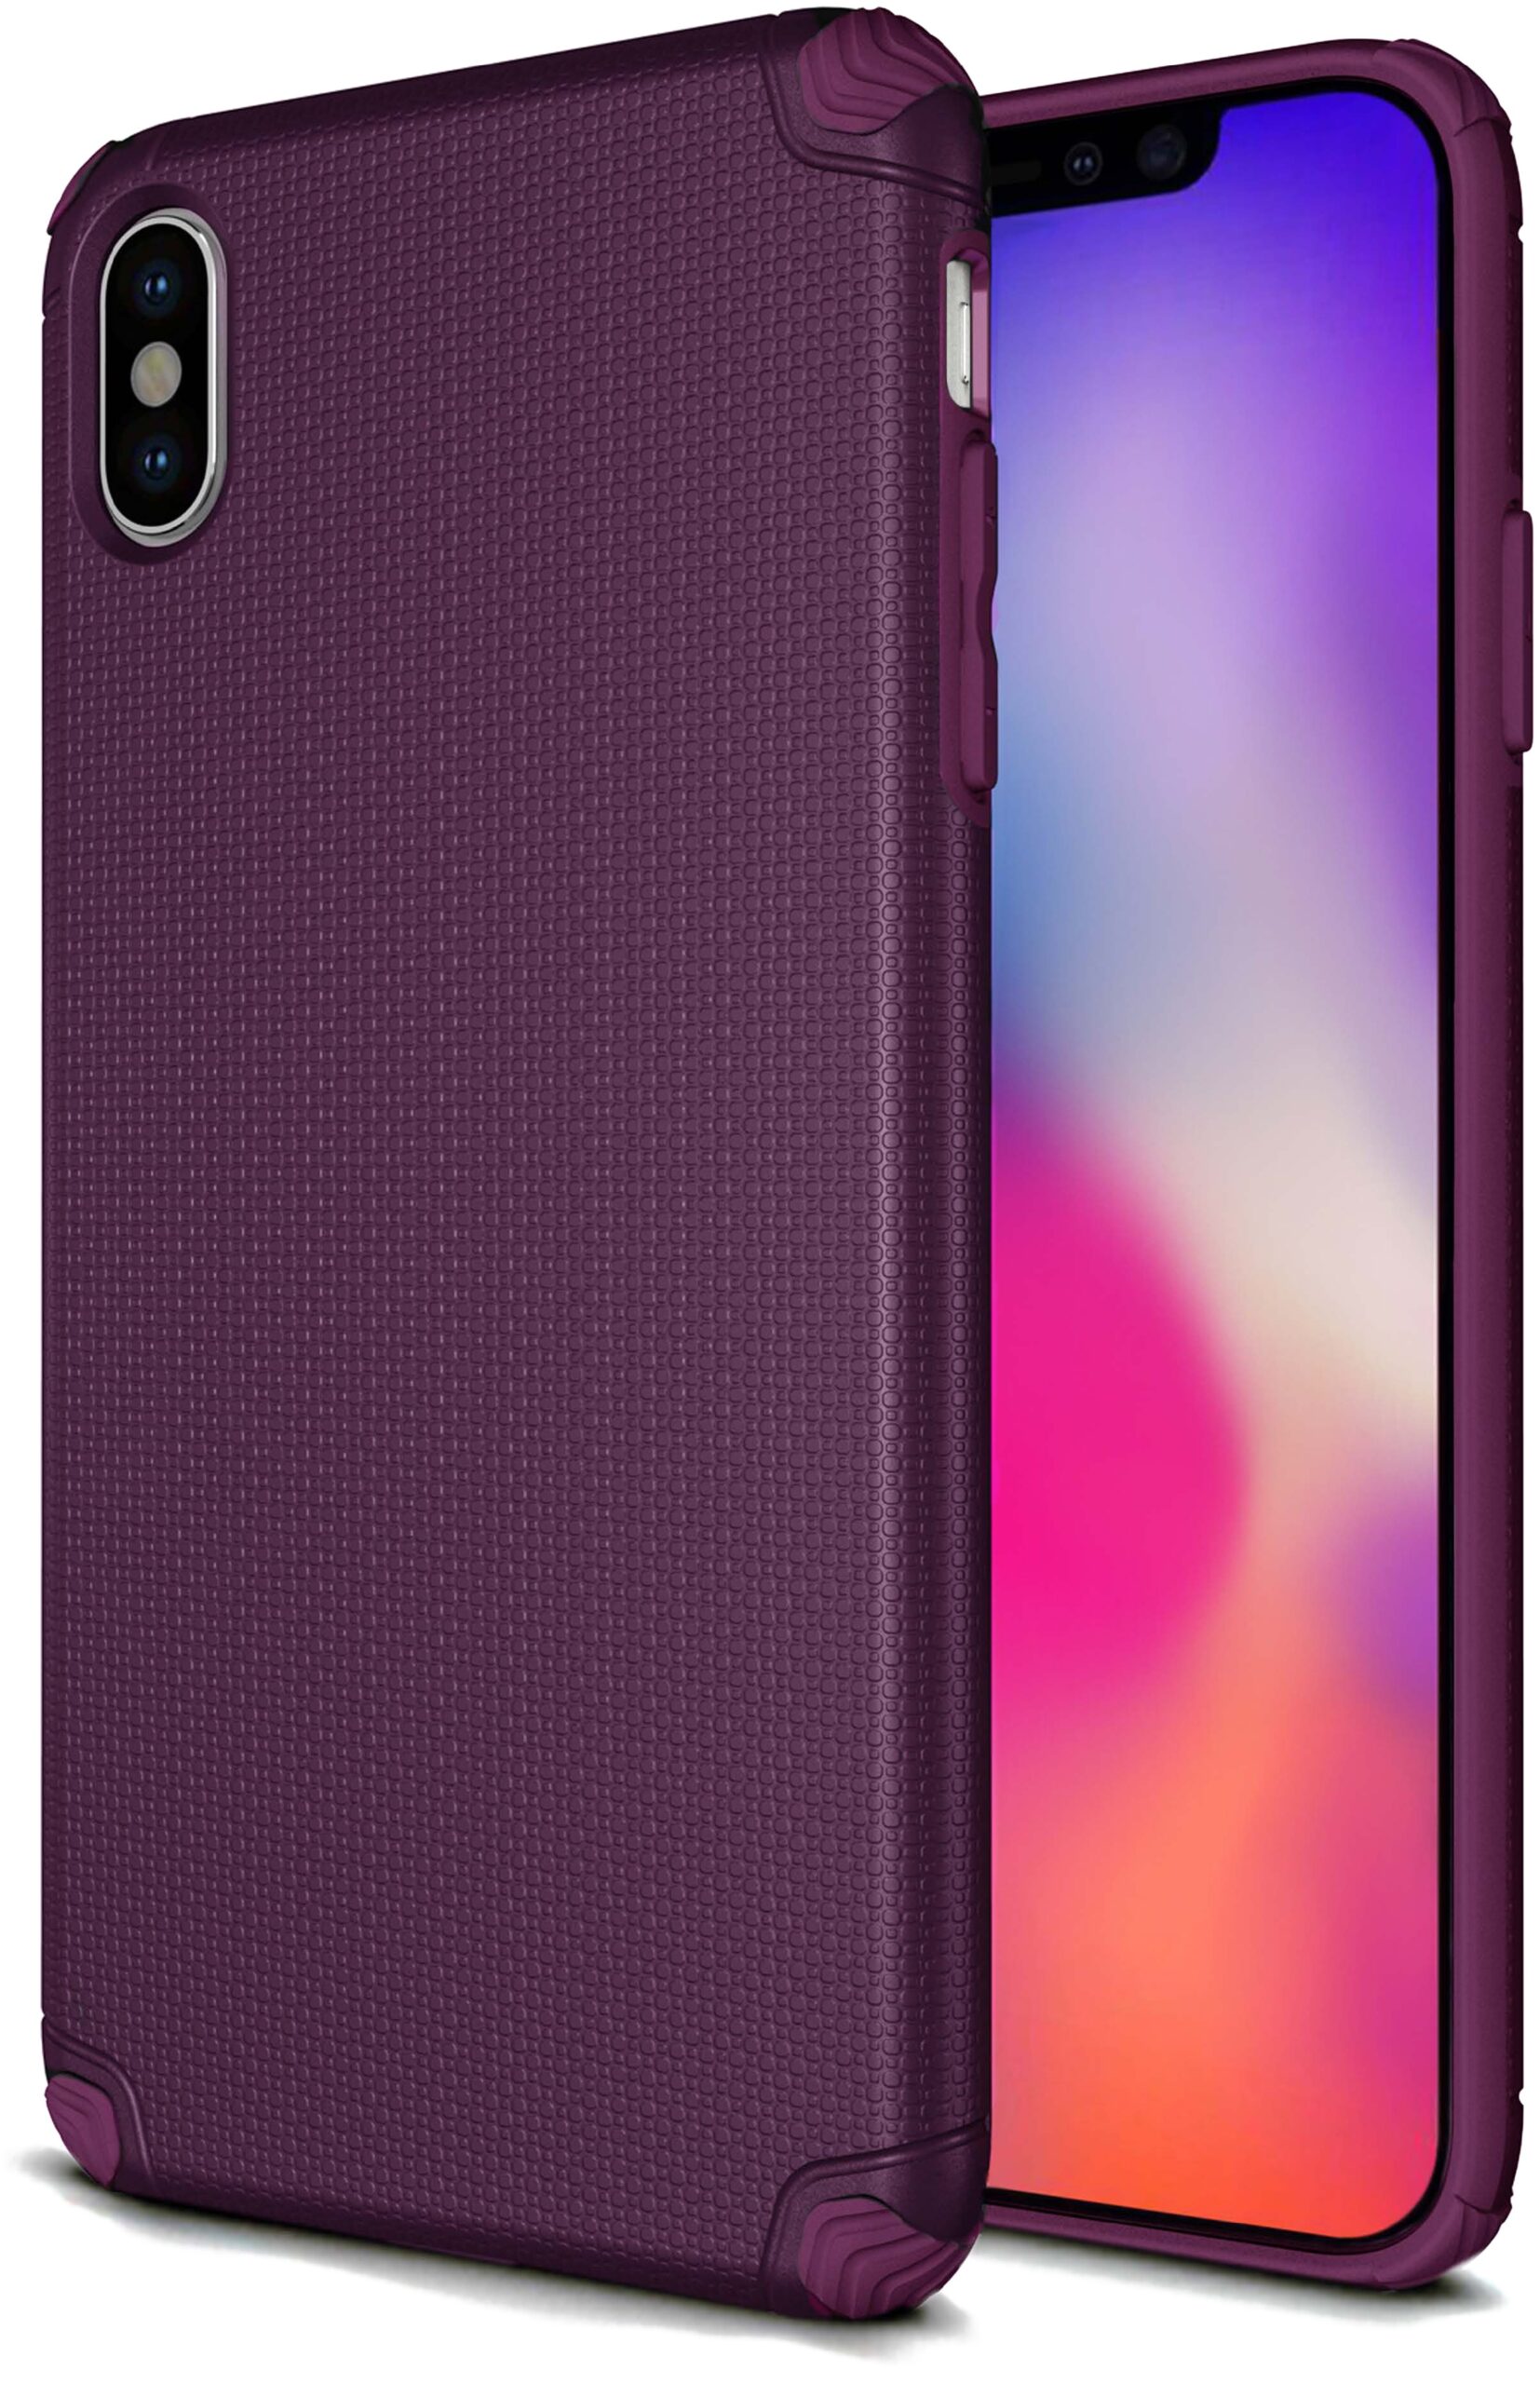 Base ProTech - Rugged Armor Protective Case for iPhone X Max - Purple